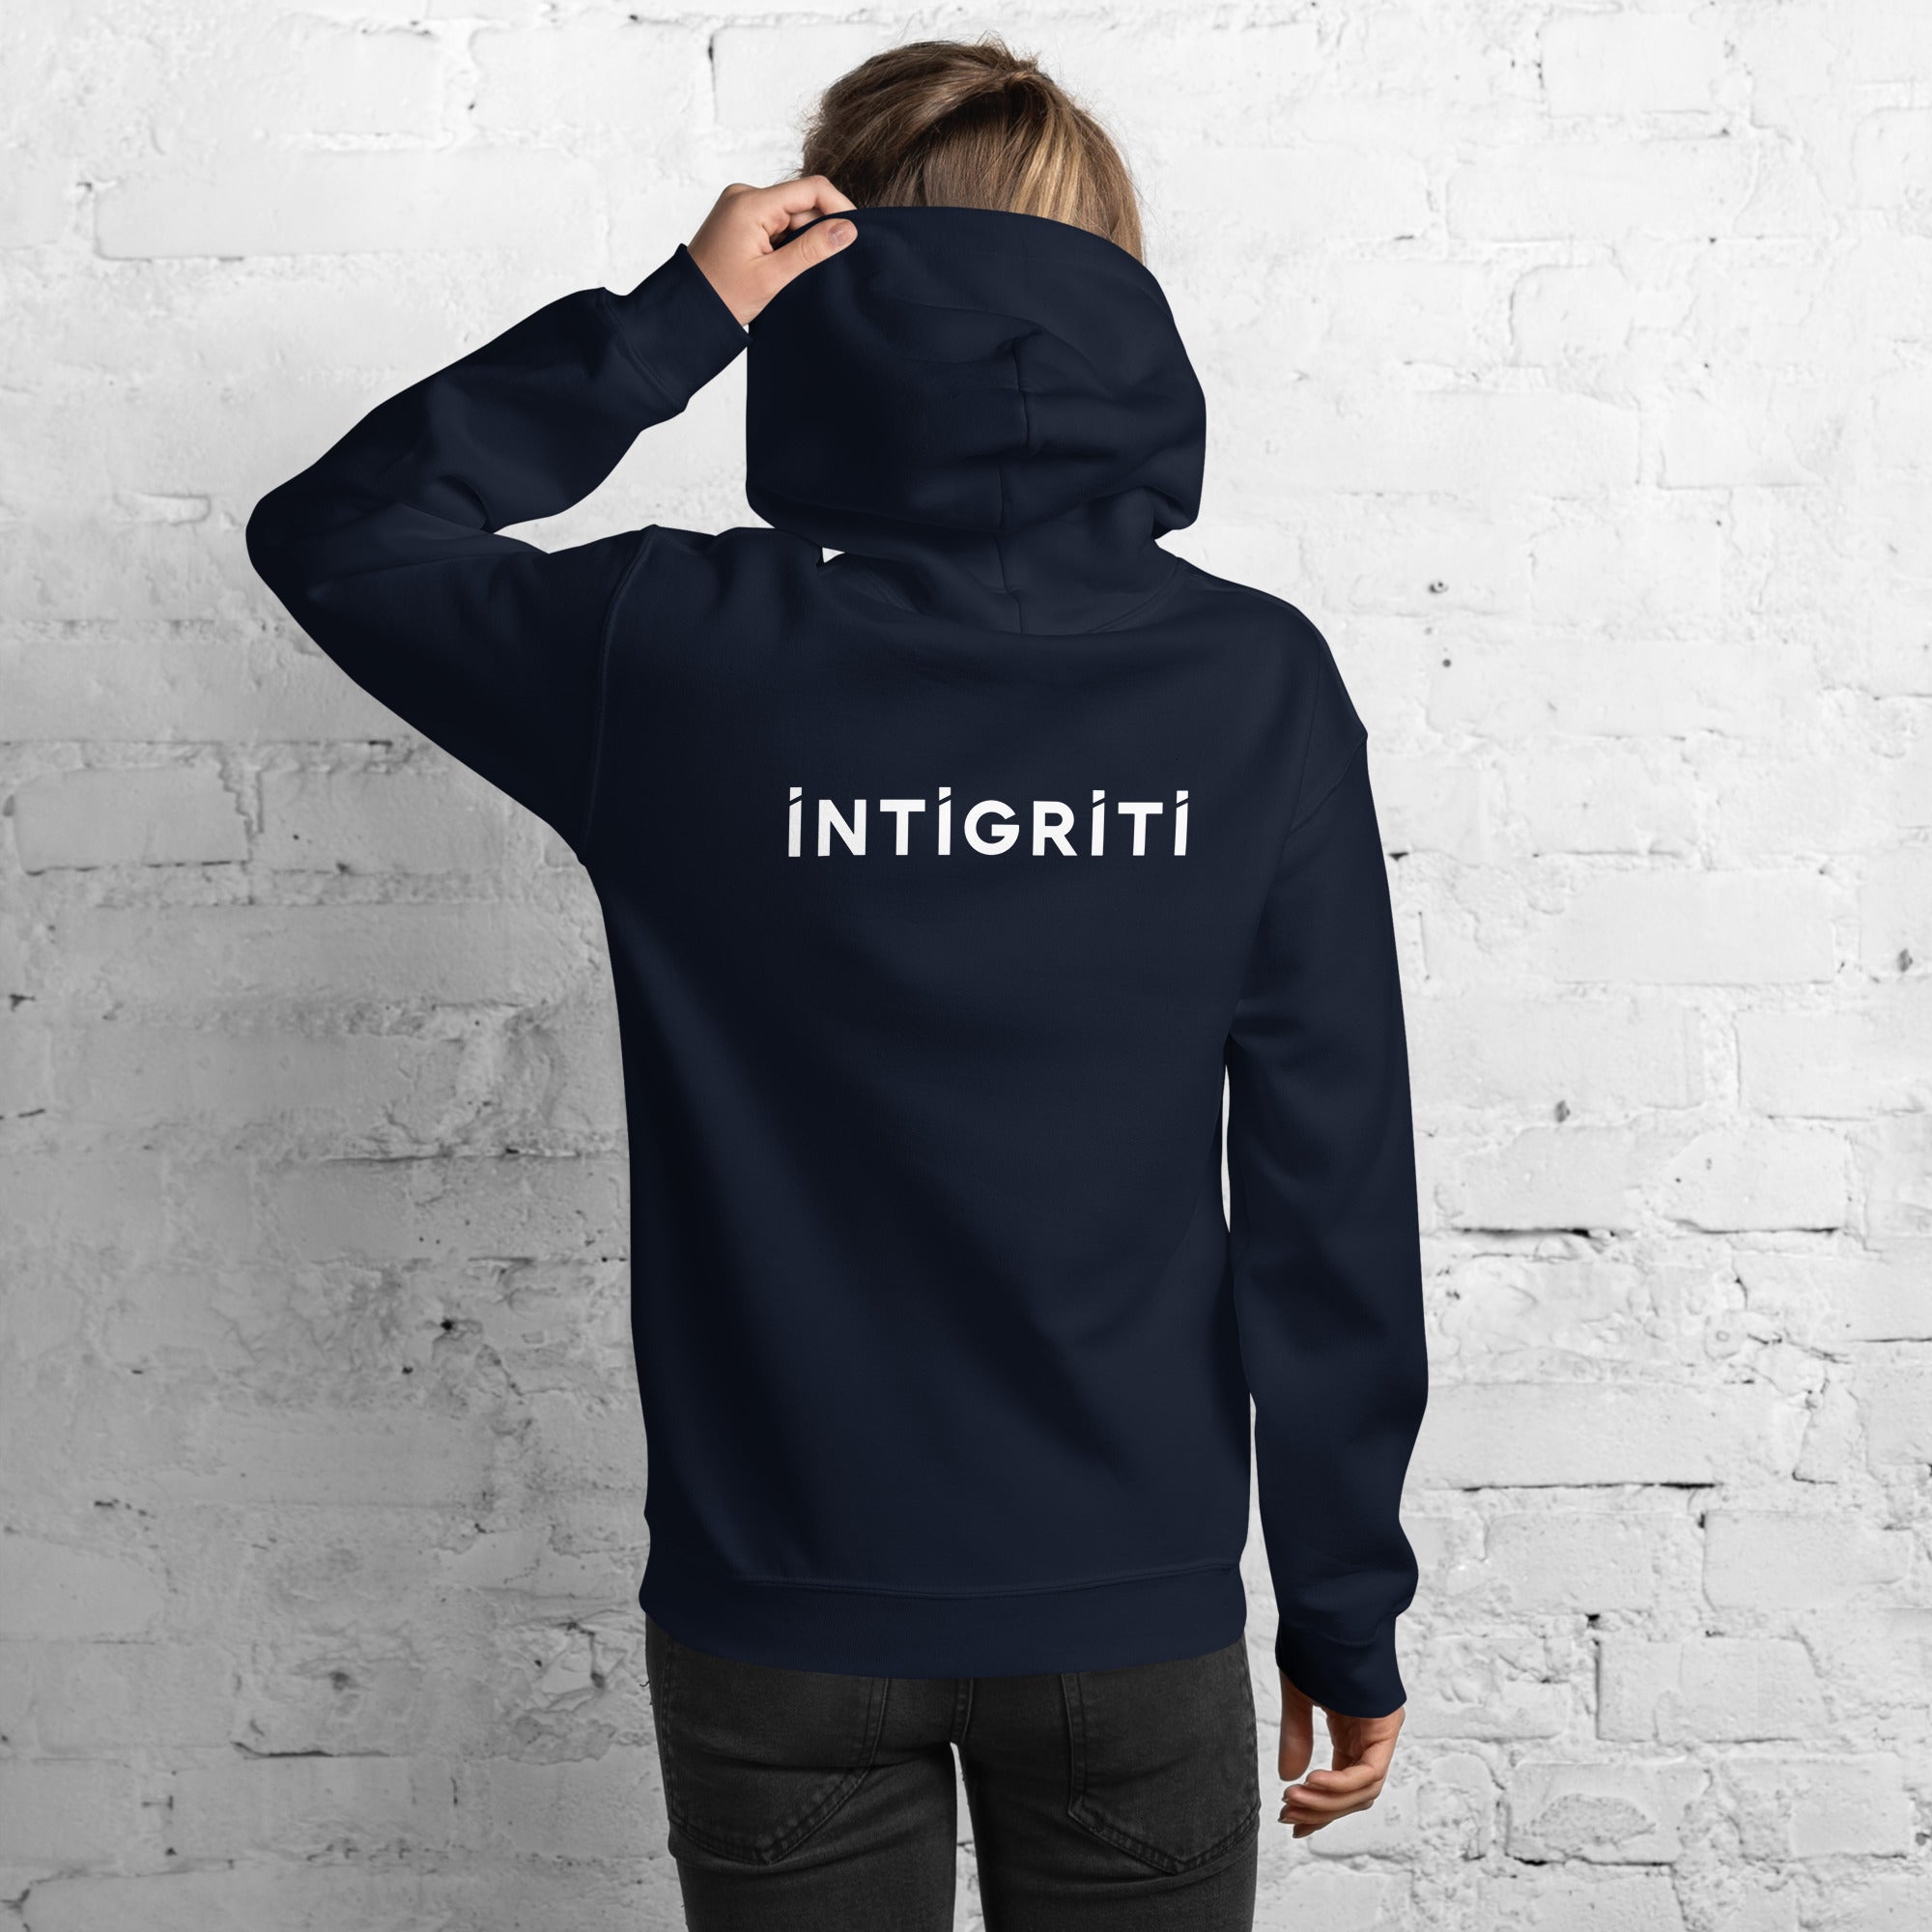 Hoodie embroided – Intigriti's swag shop